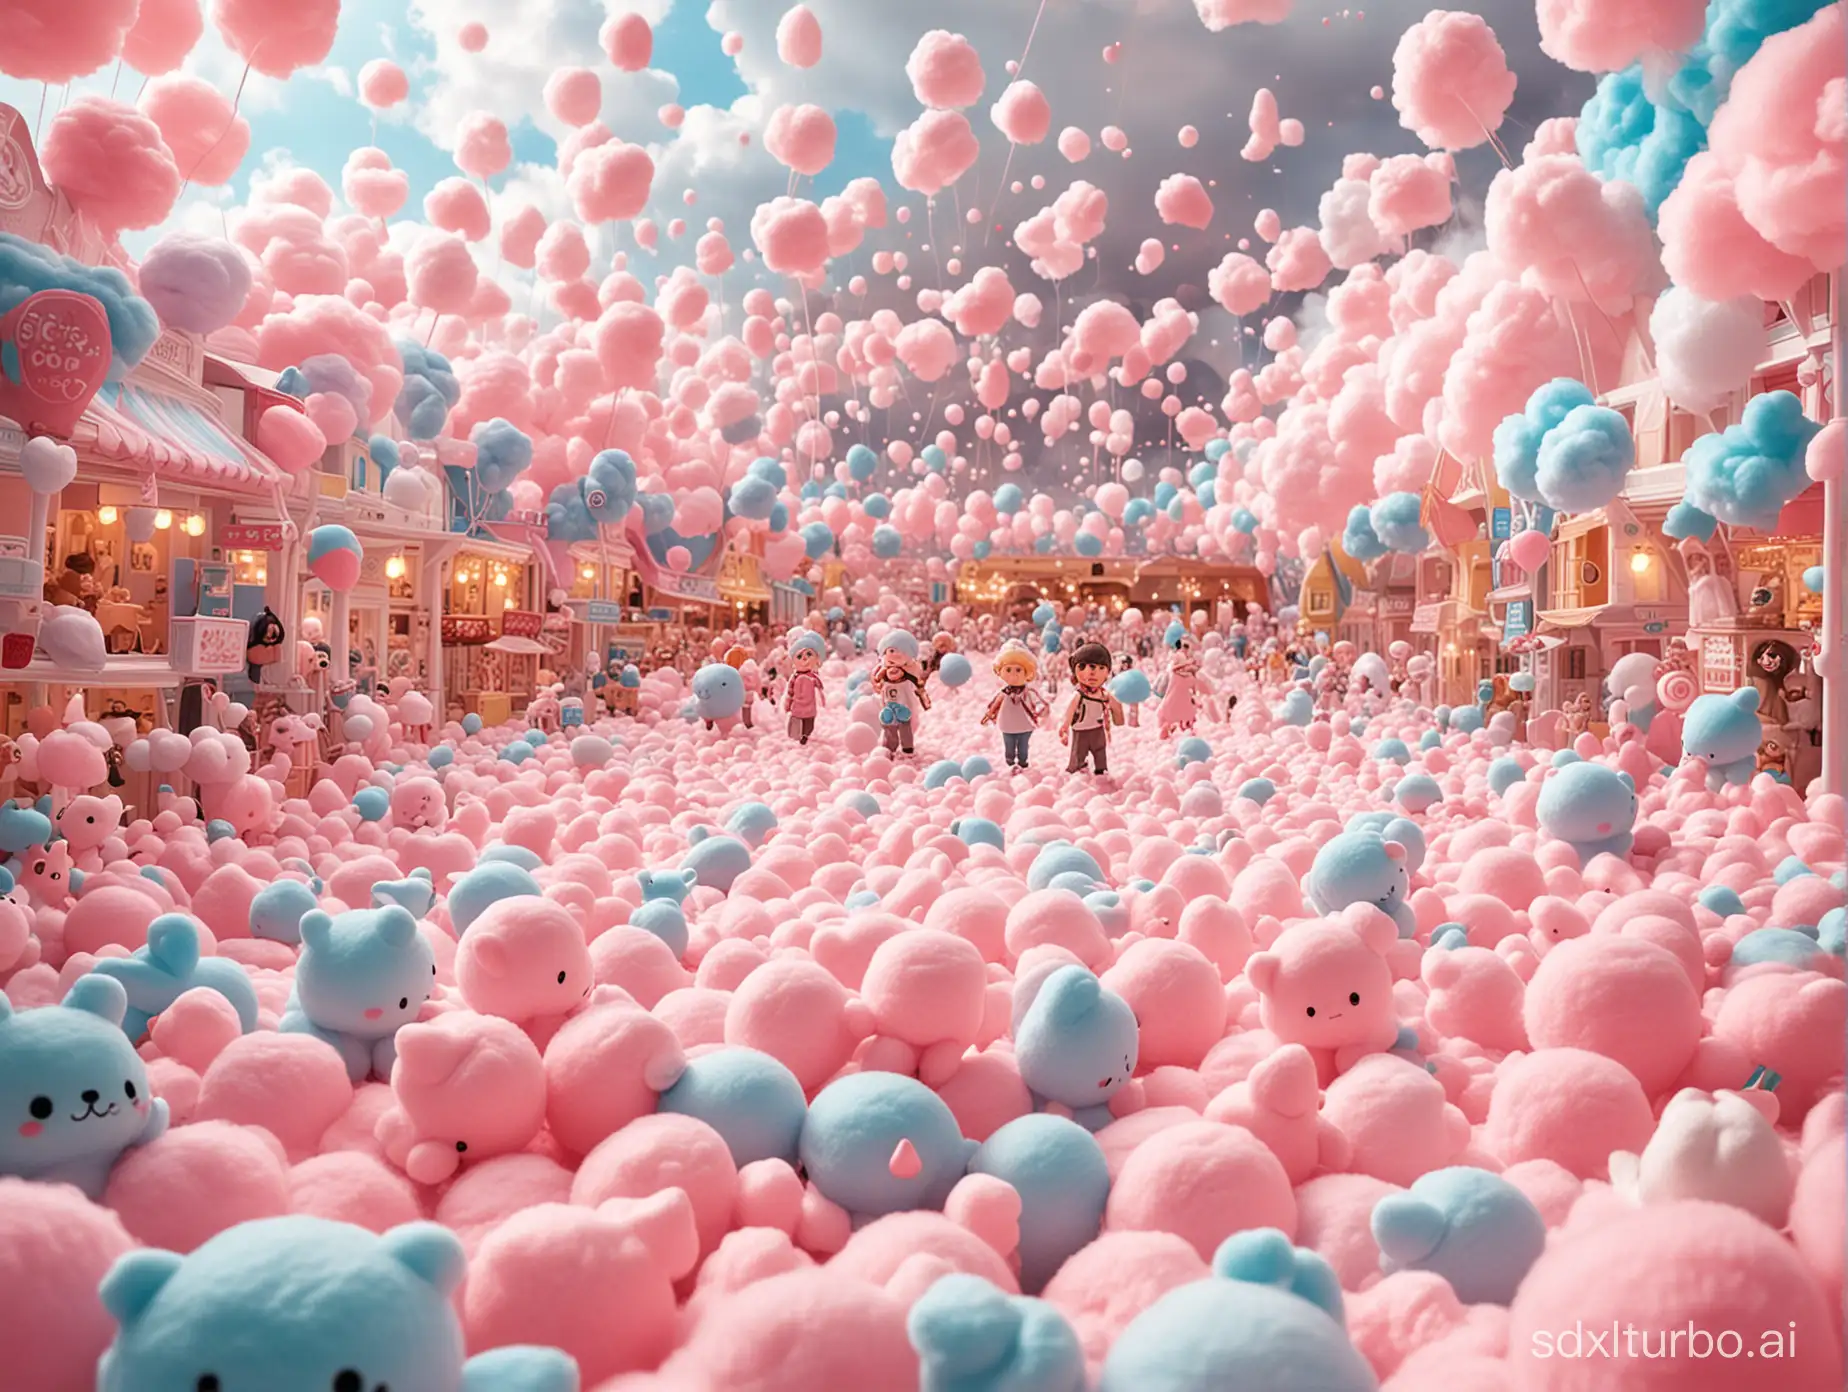 A world filled with cotton candy, adorable, so cute it's exploding, bouncy, with lots of figurines.